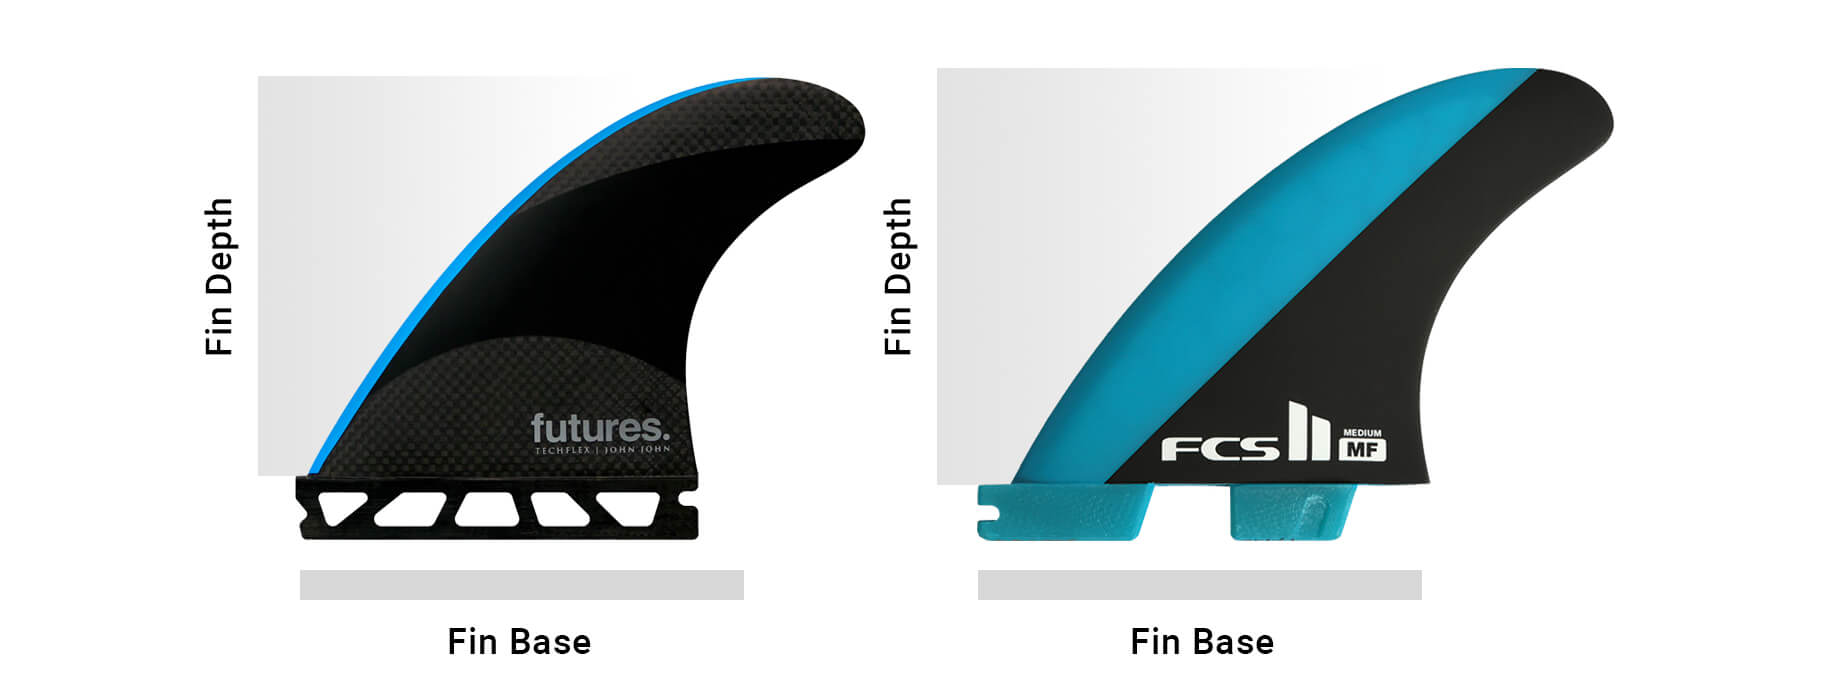 Surfboard Fins Futures Black Left and Right Set 2 x Fins Size Medium 